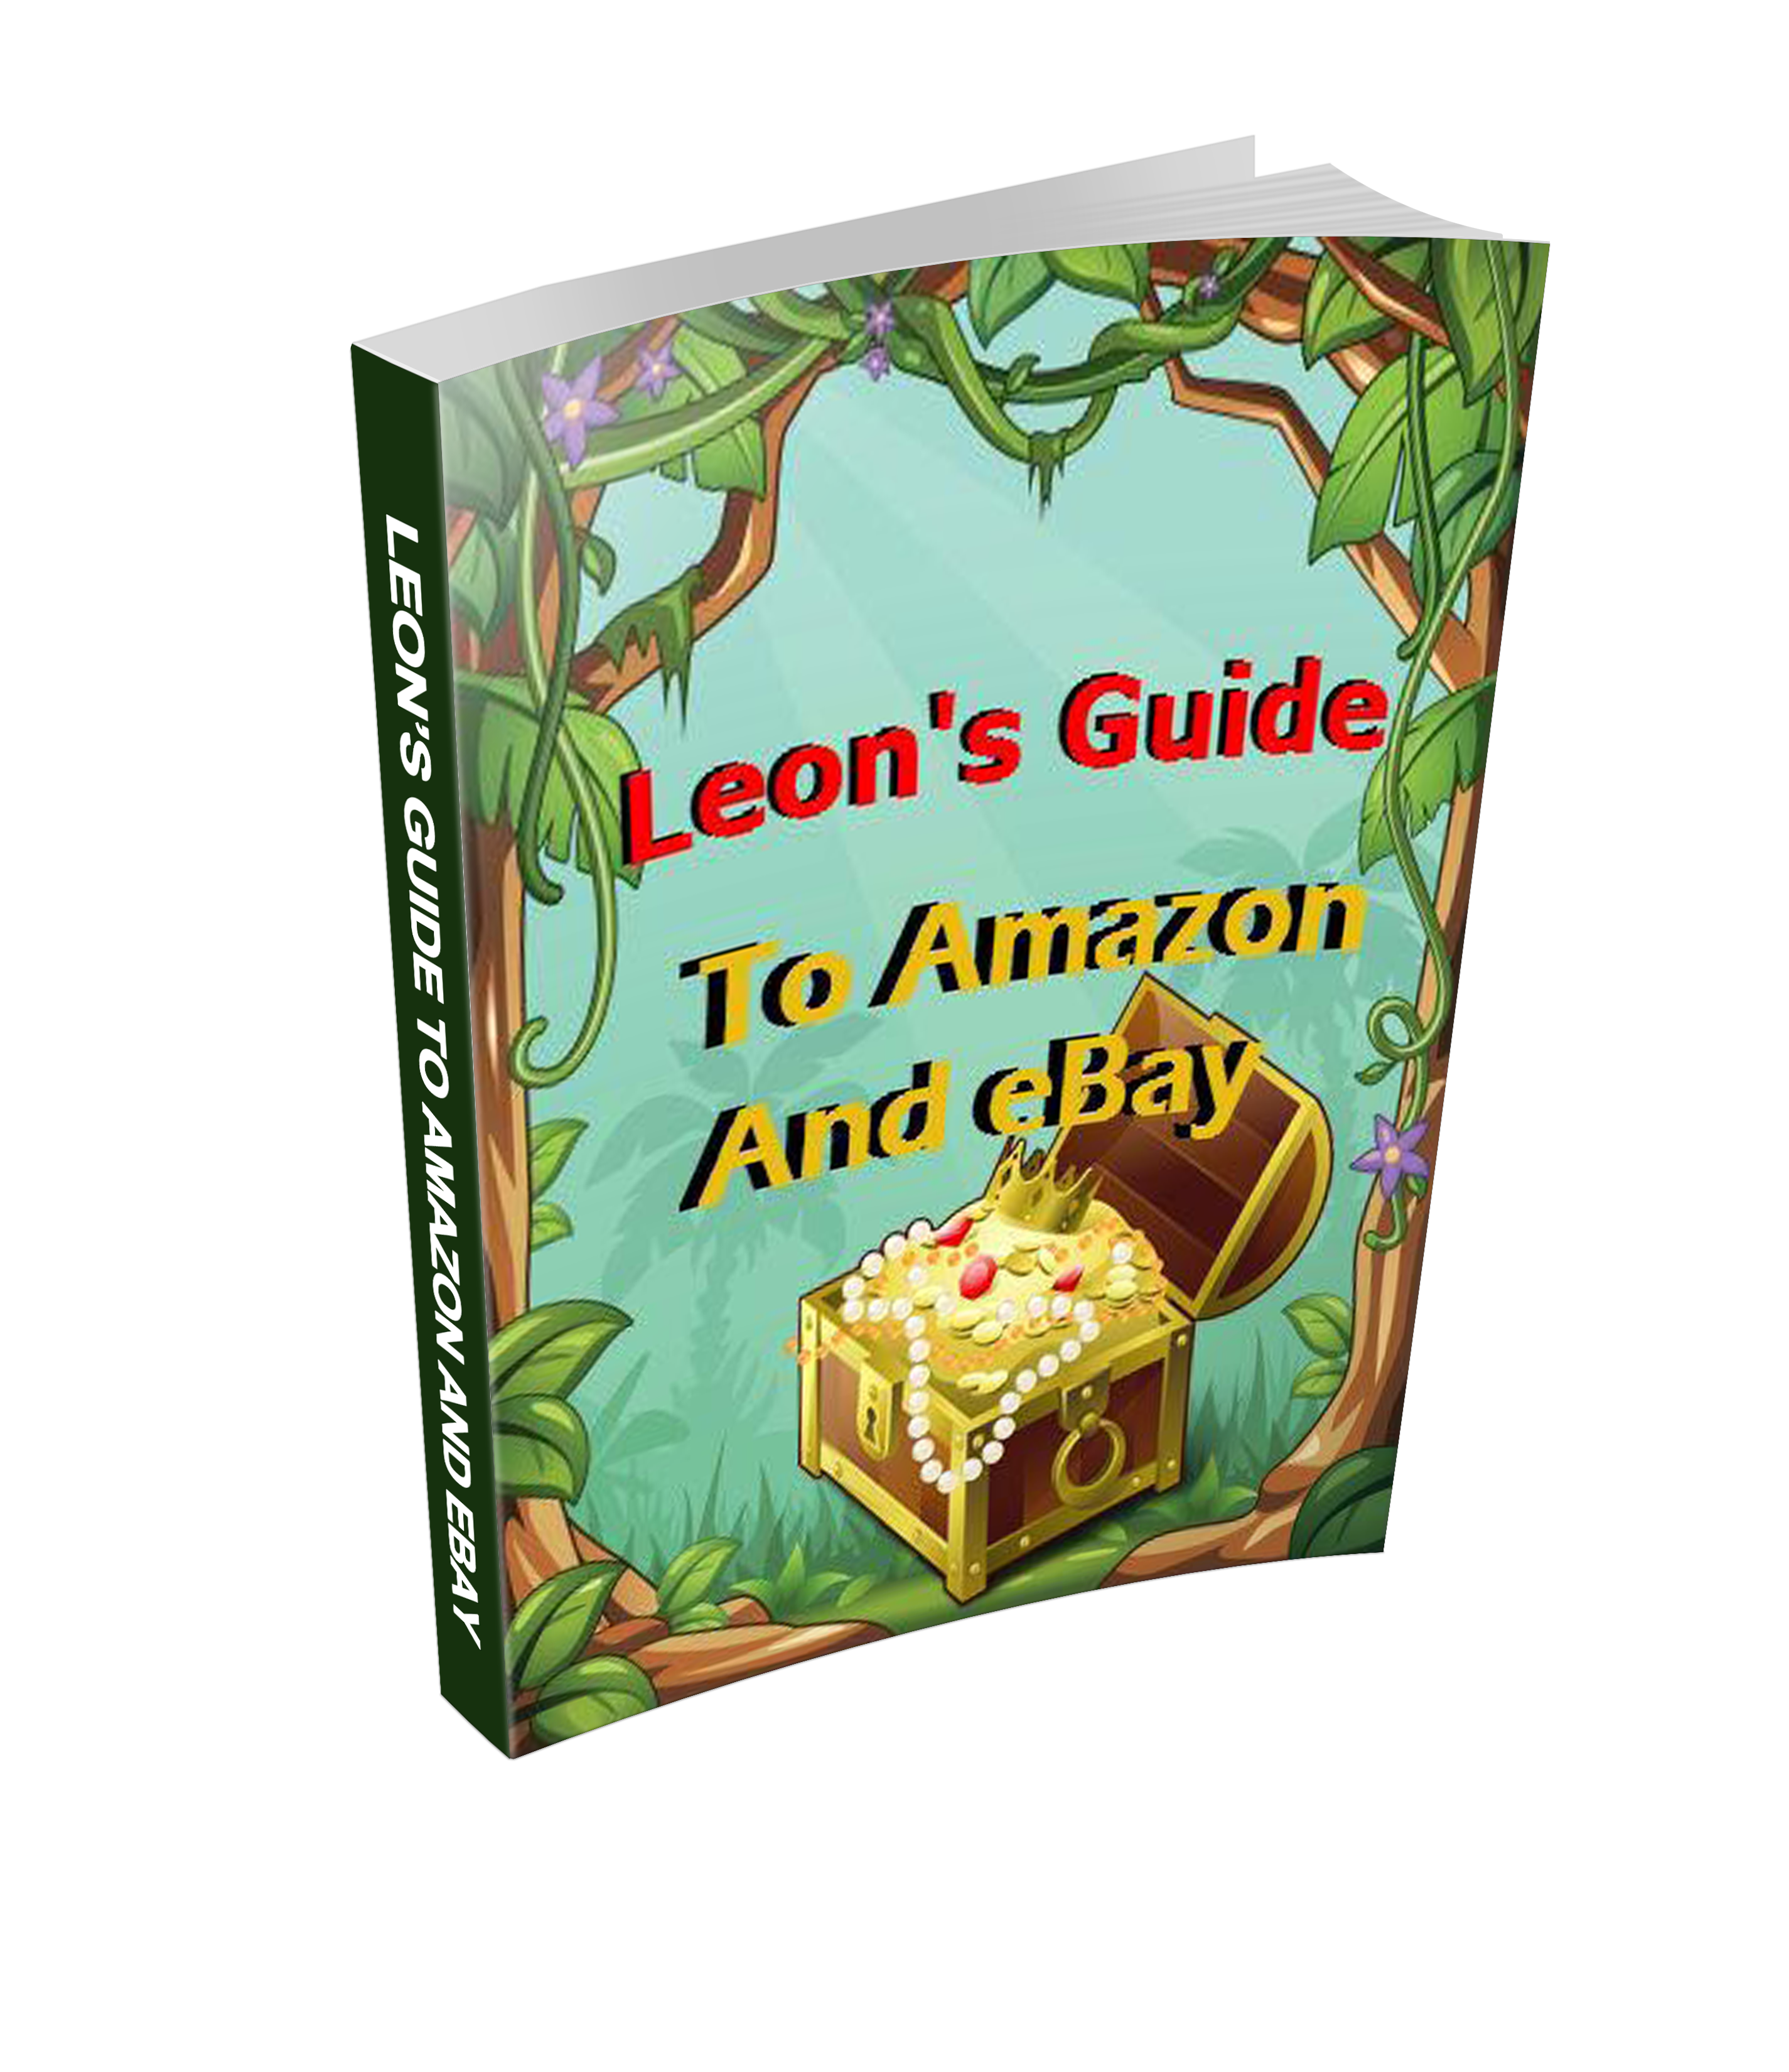 Leons Guide To Amazon and Ebay